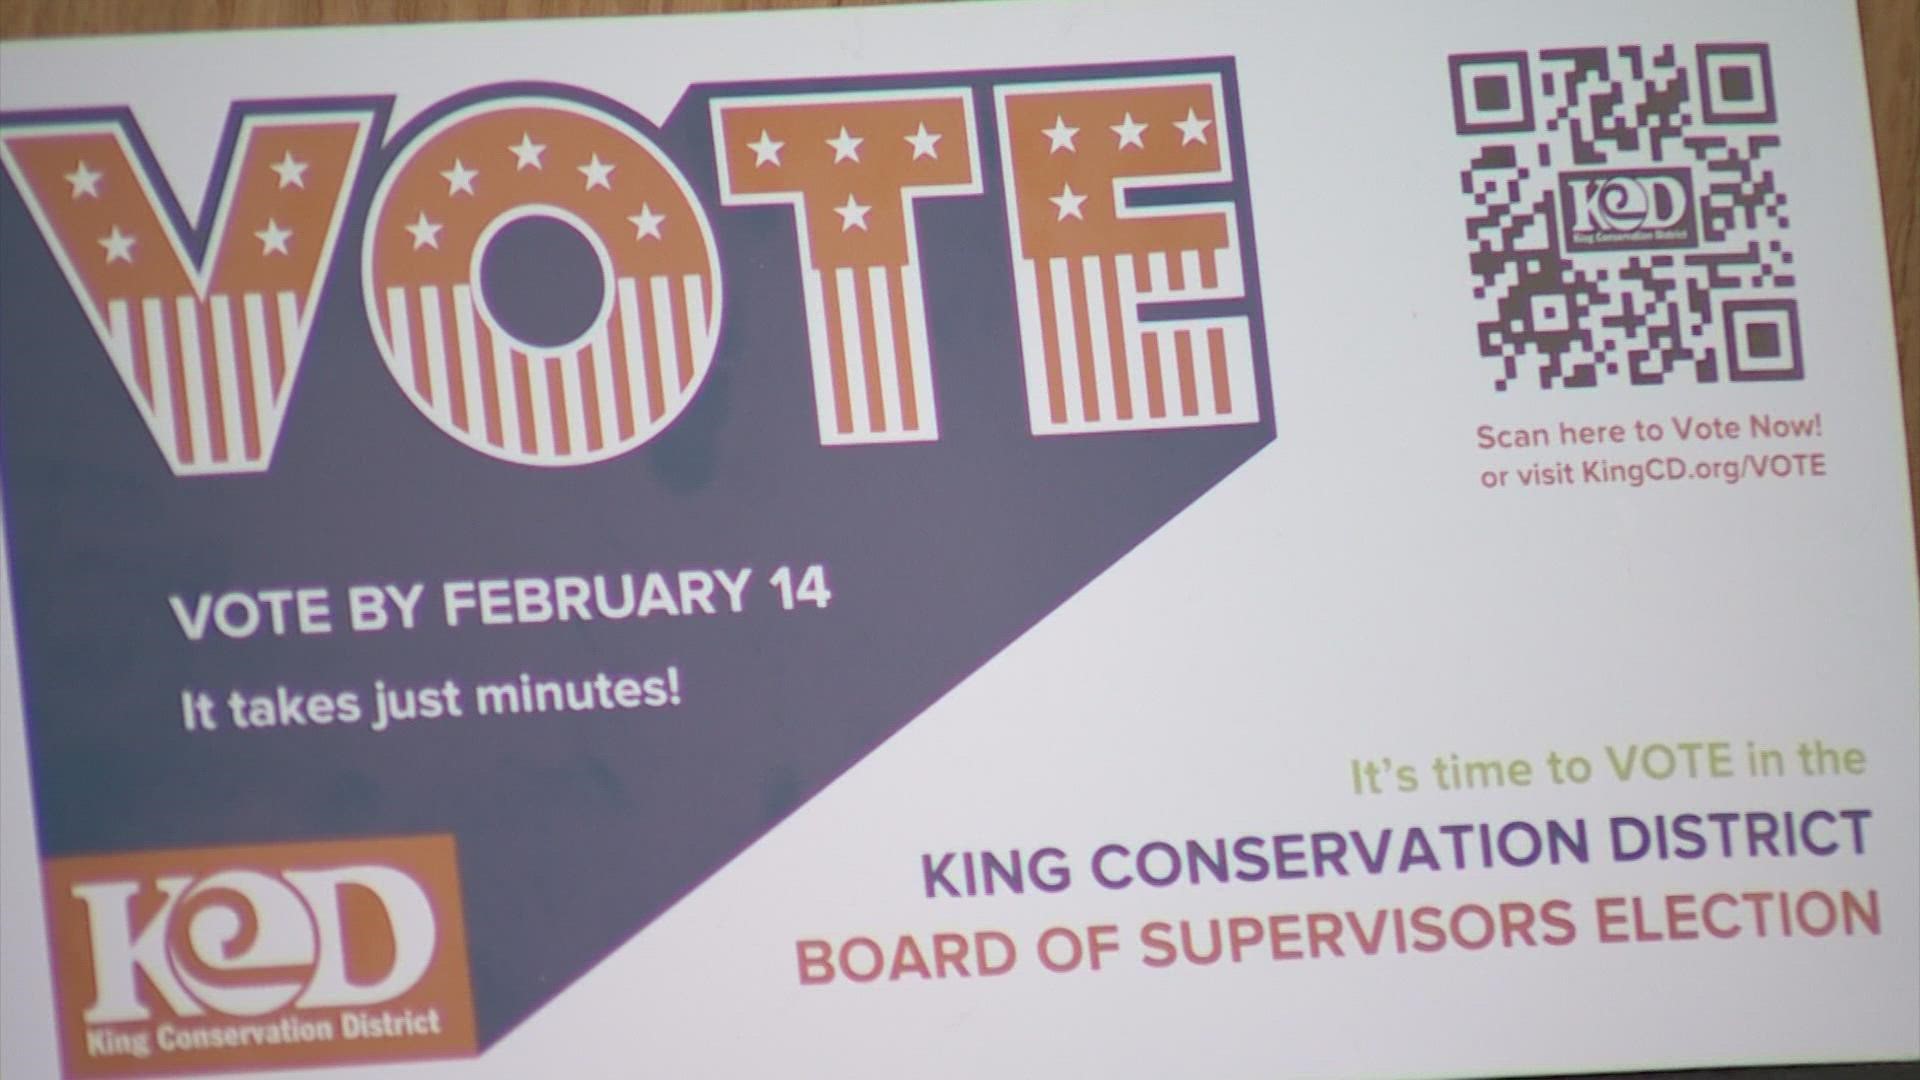 The election for a spot on the King Conservation District Board of Supervisors will rely primarily on electronic voting.